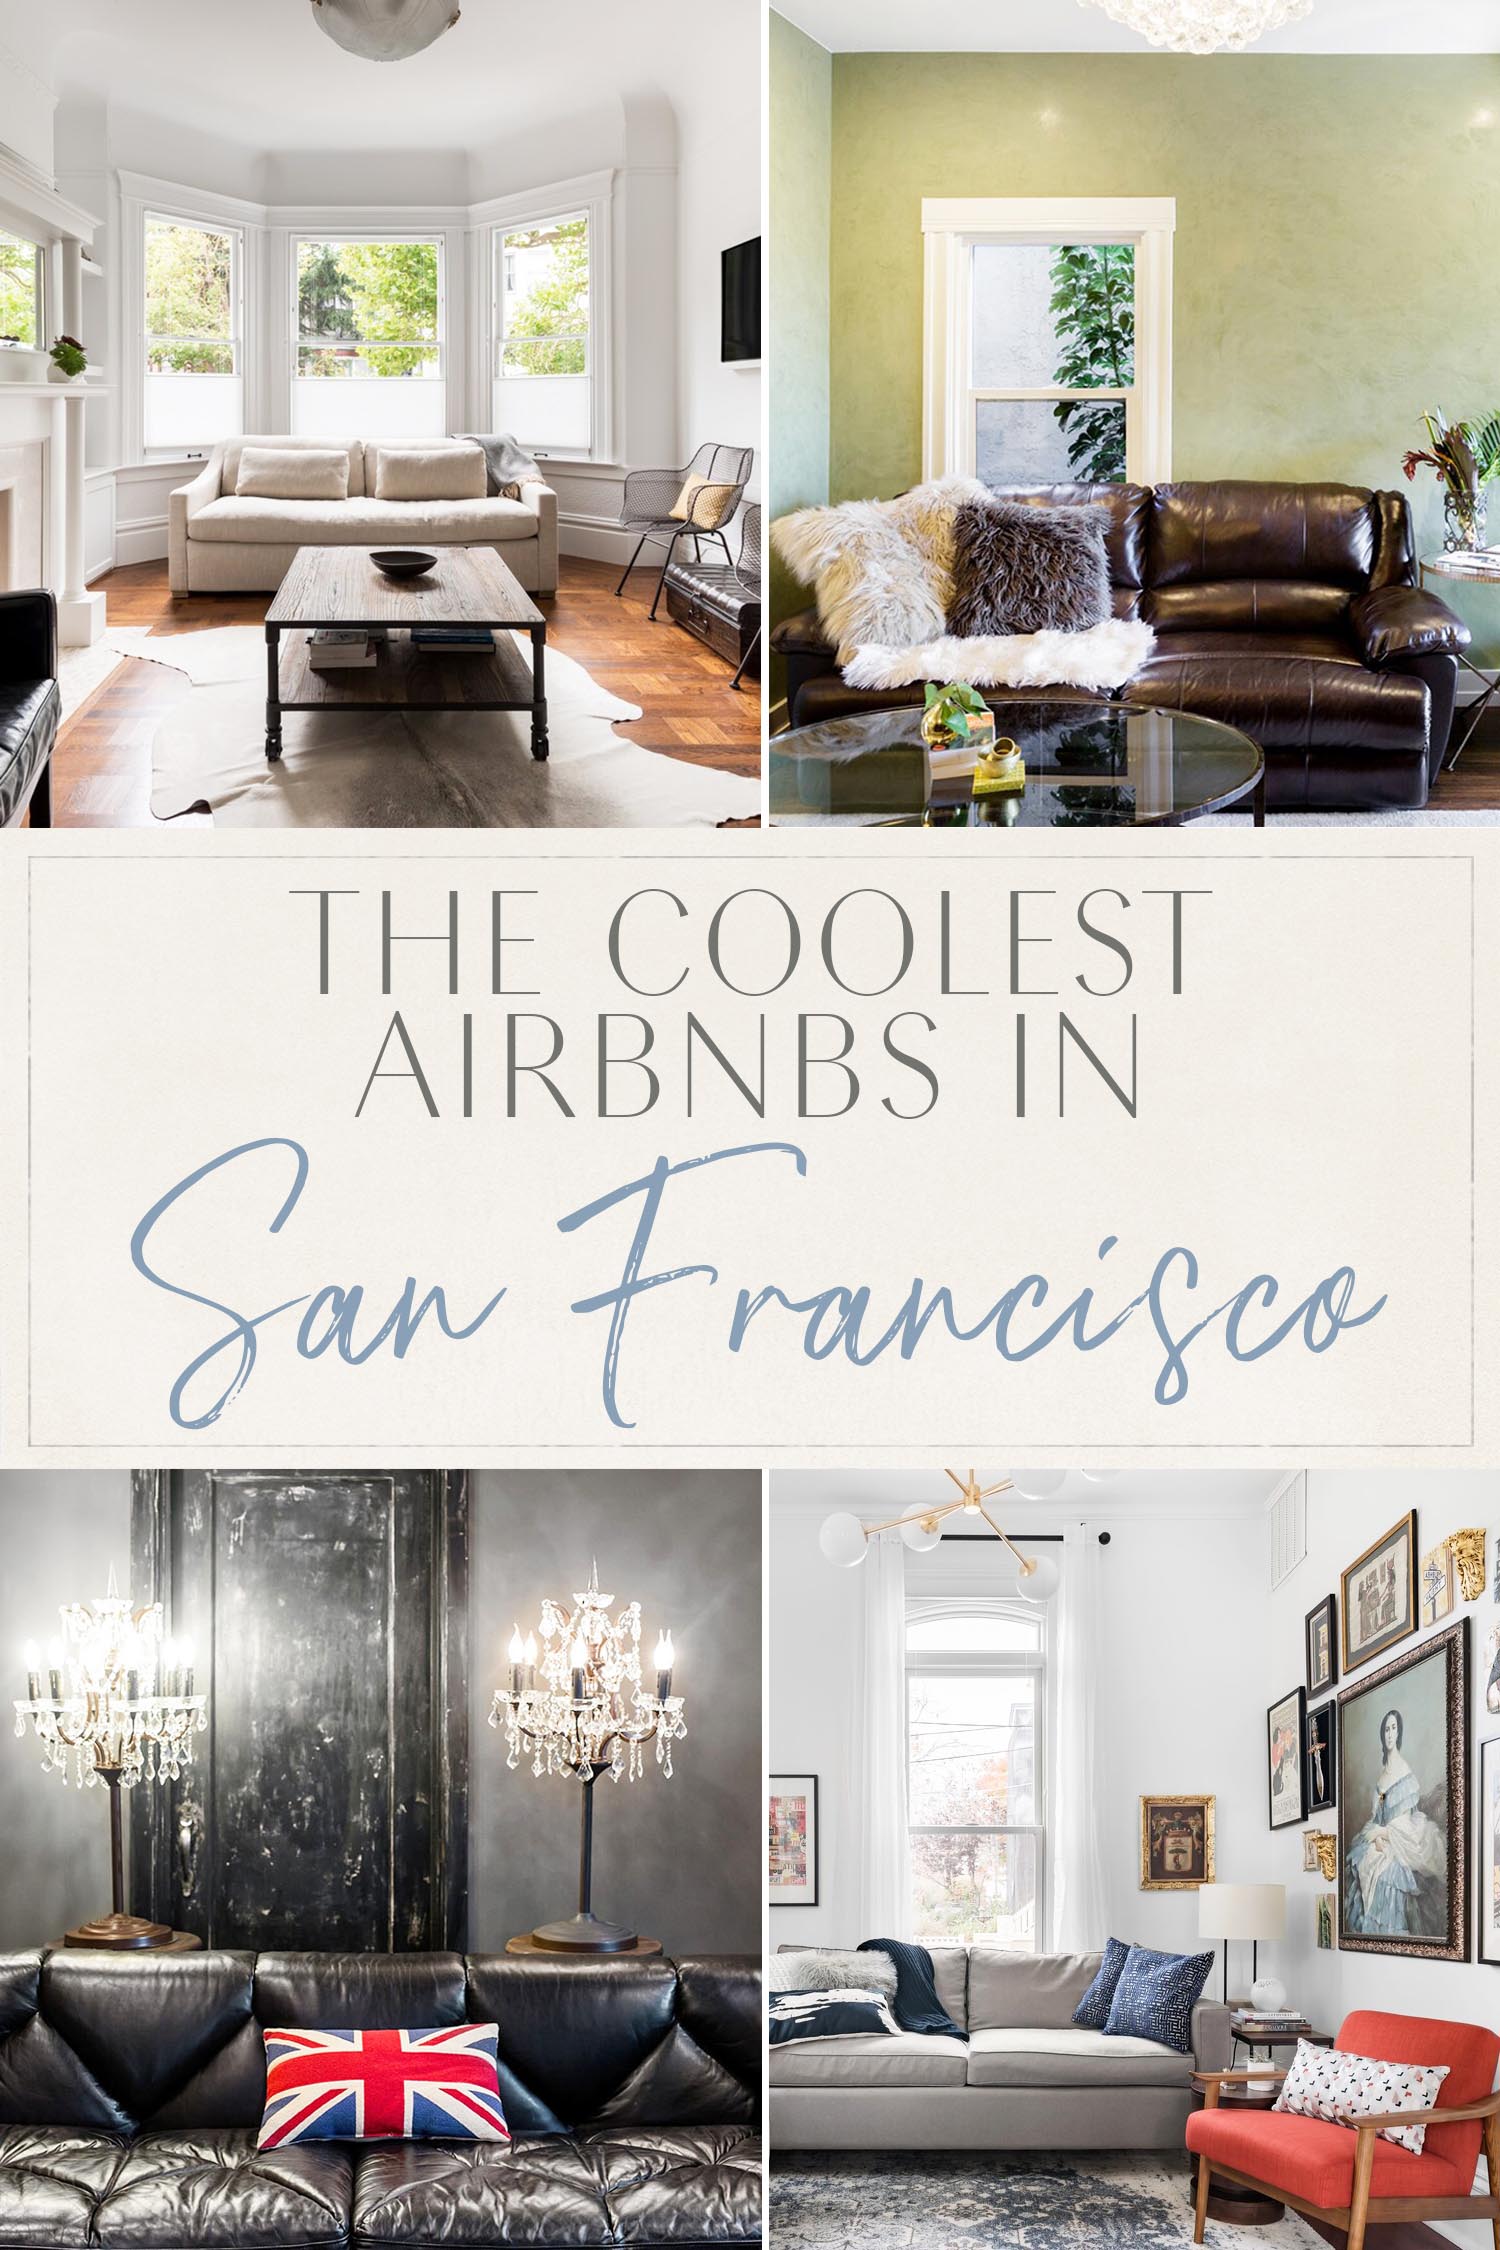 Coolest Airbnbs San Francisco